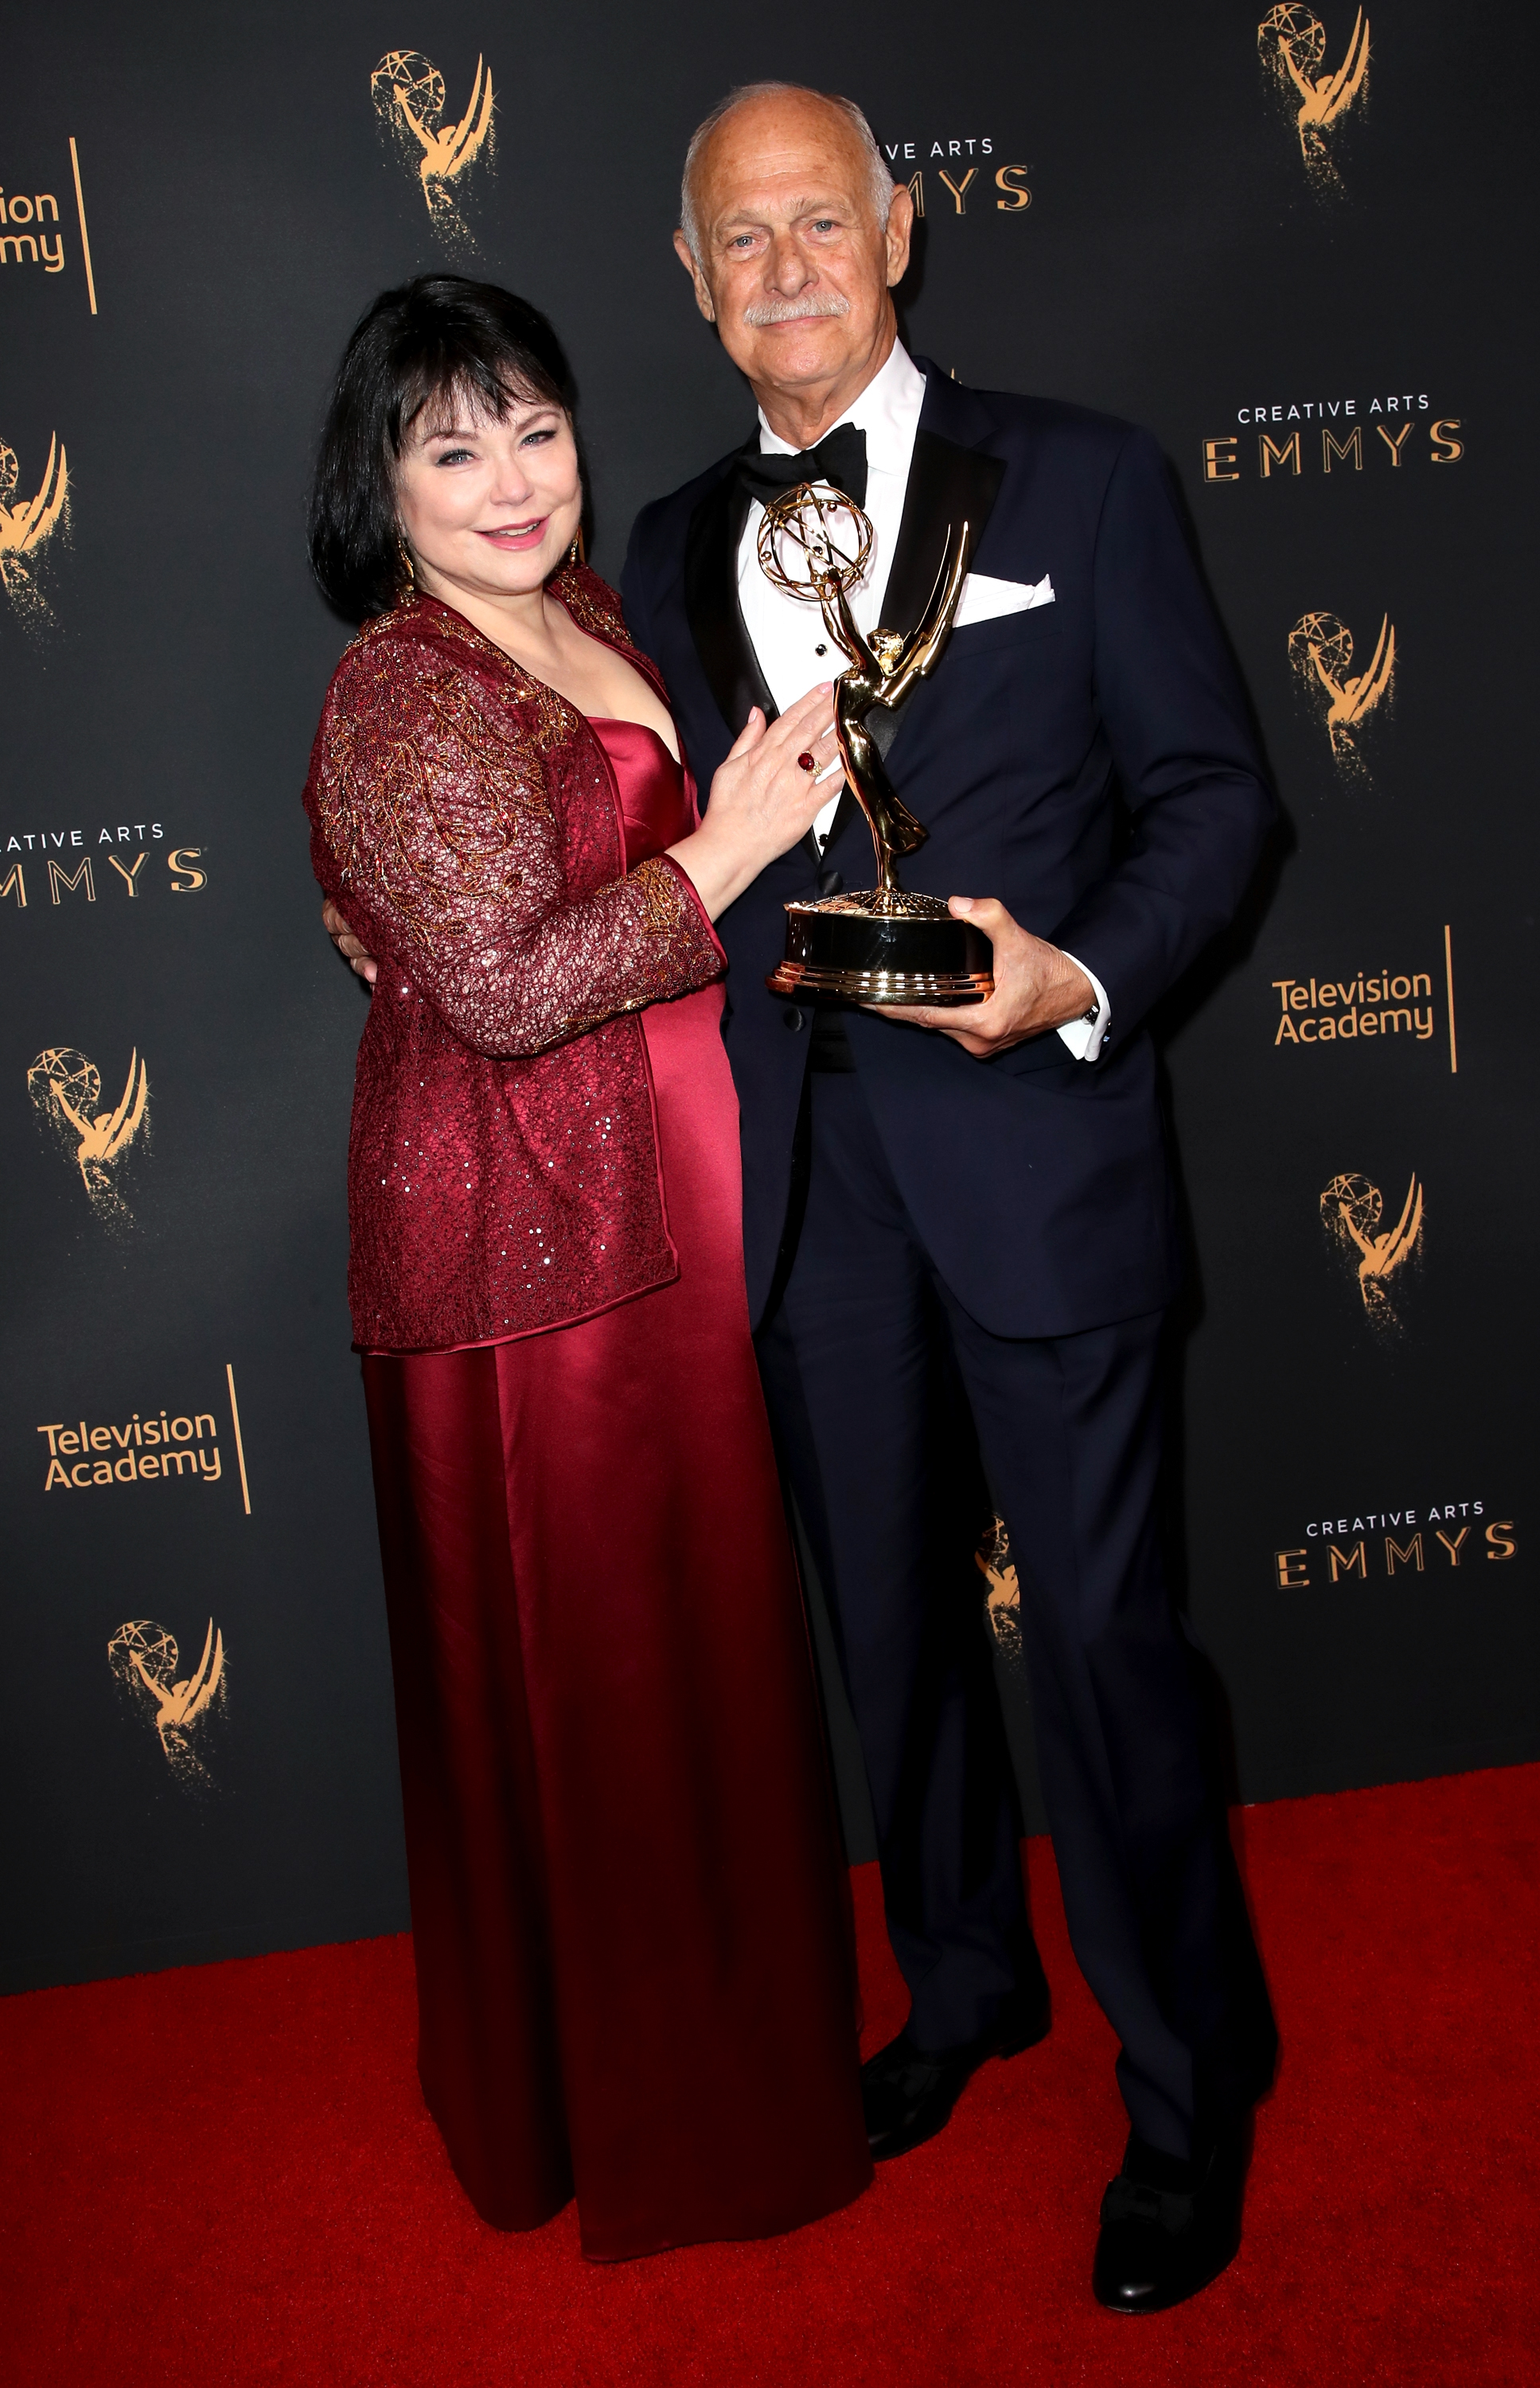 Delta Burke and Gerald McRaney at the 2017 Creative Arts Emmy Awards on September 10, 2017, in Los Angeles, California | Source: Getty Images